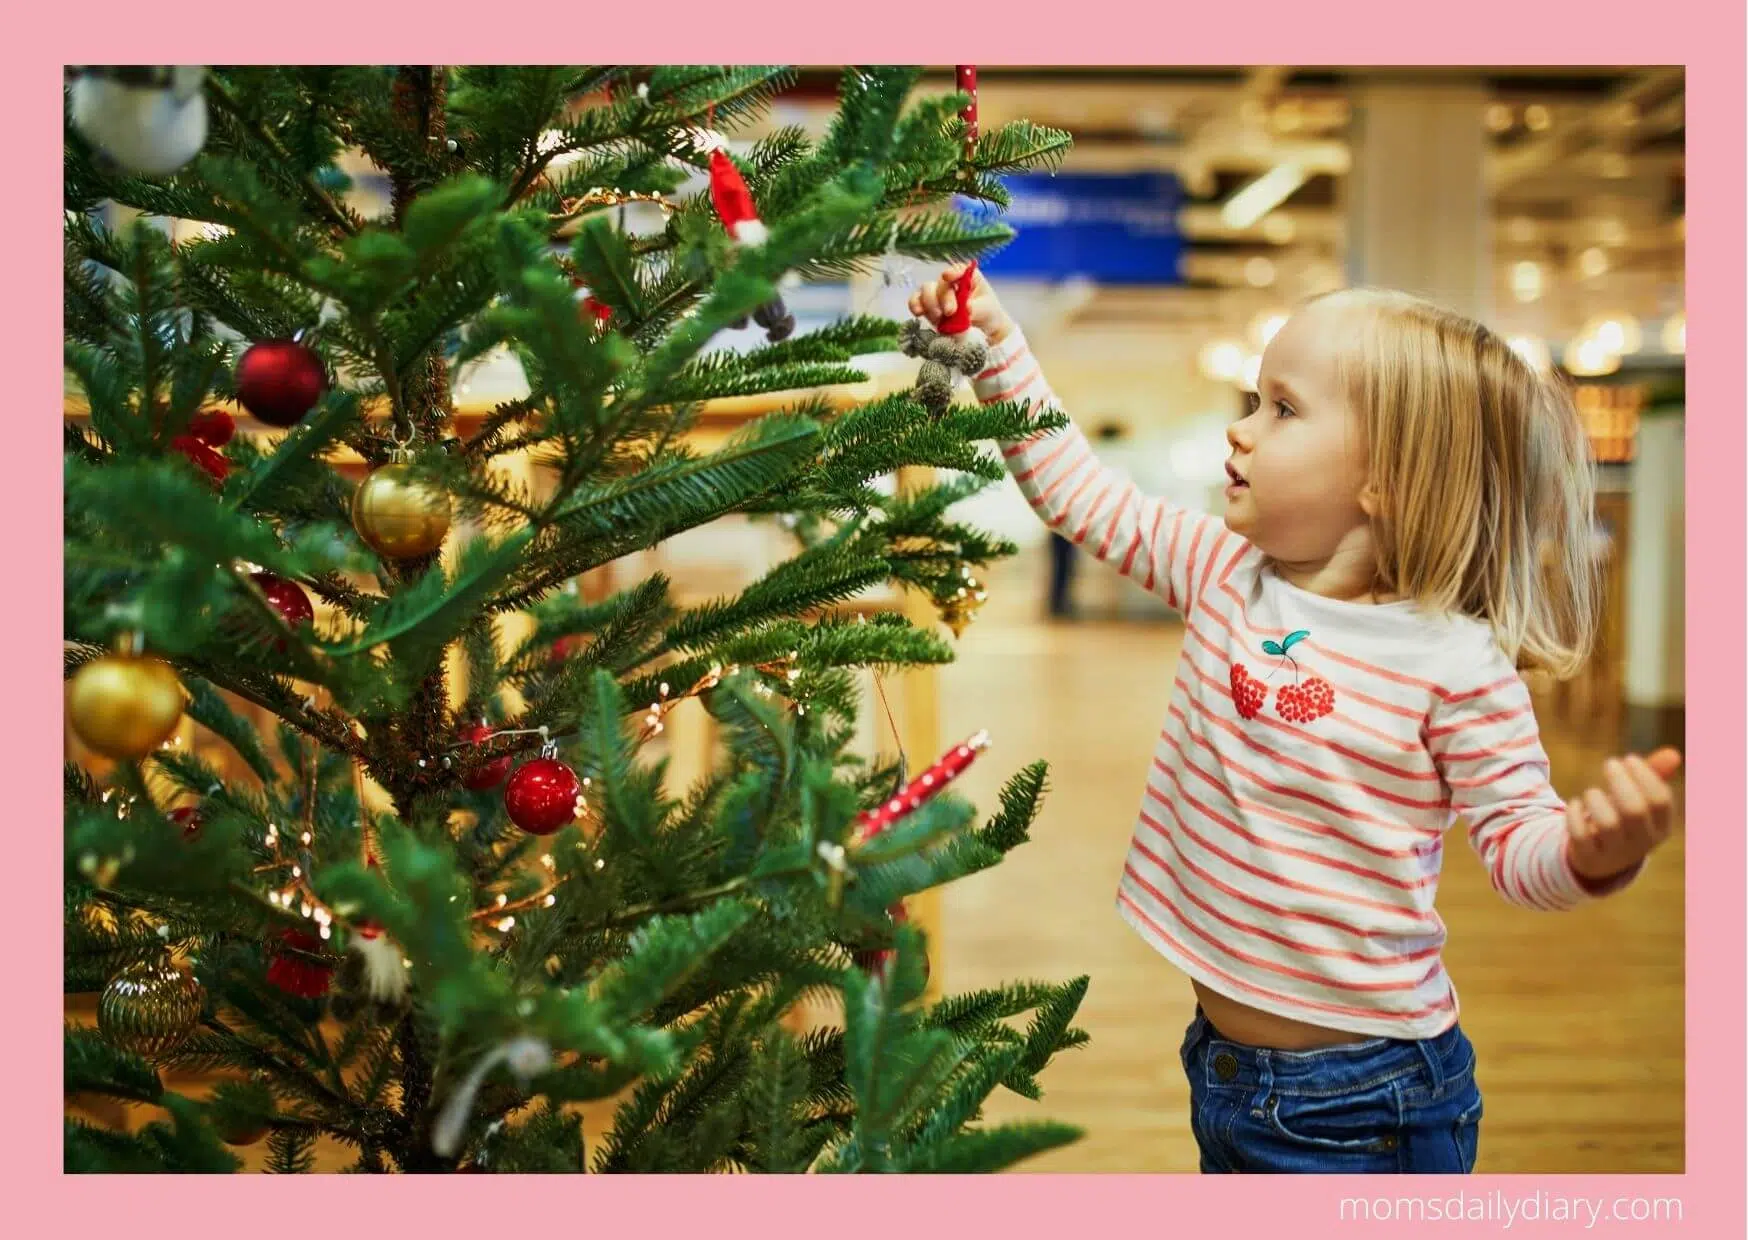 Christmas activities: Toddler ornamenting a tree